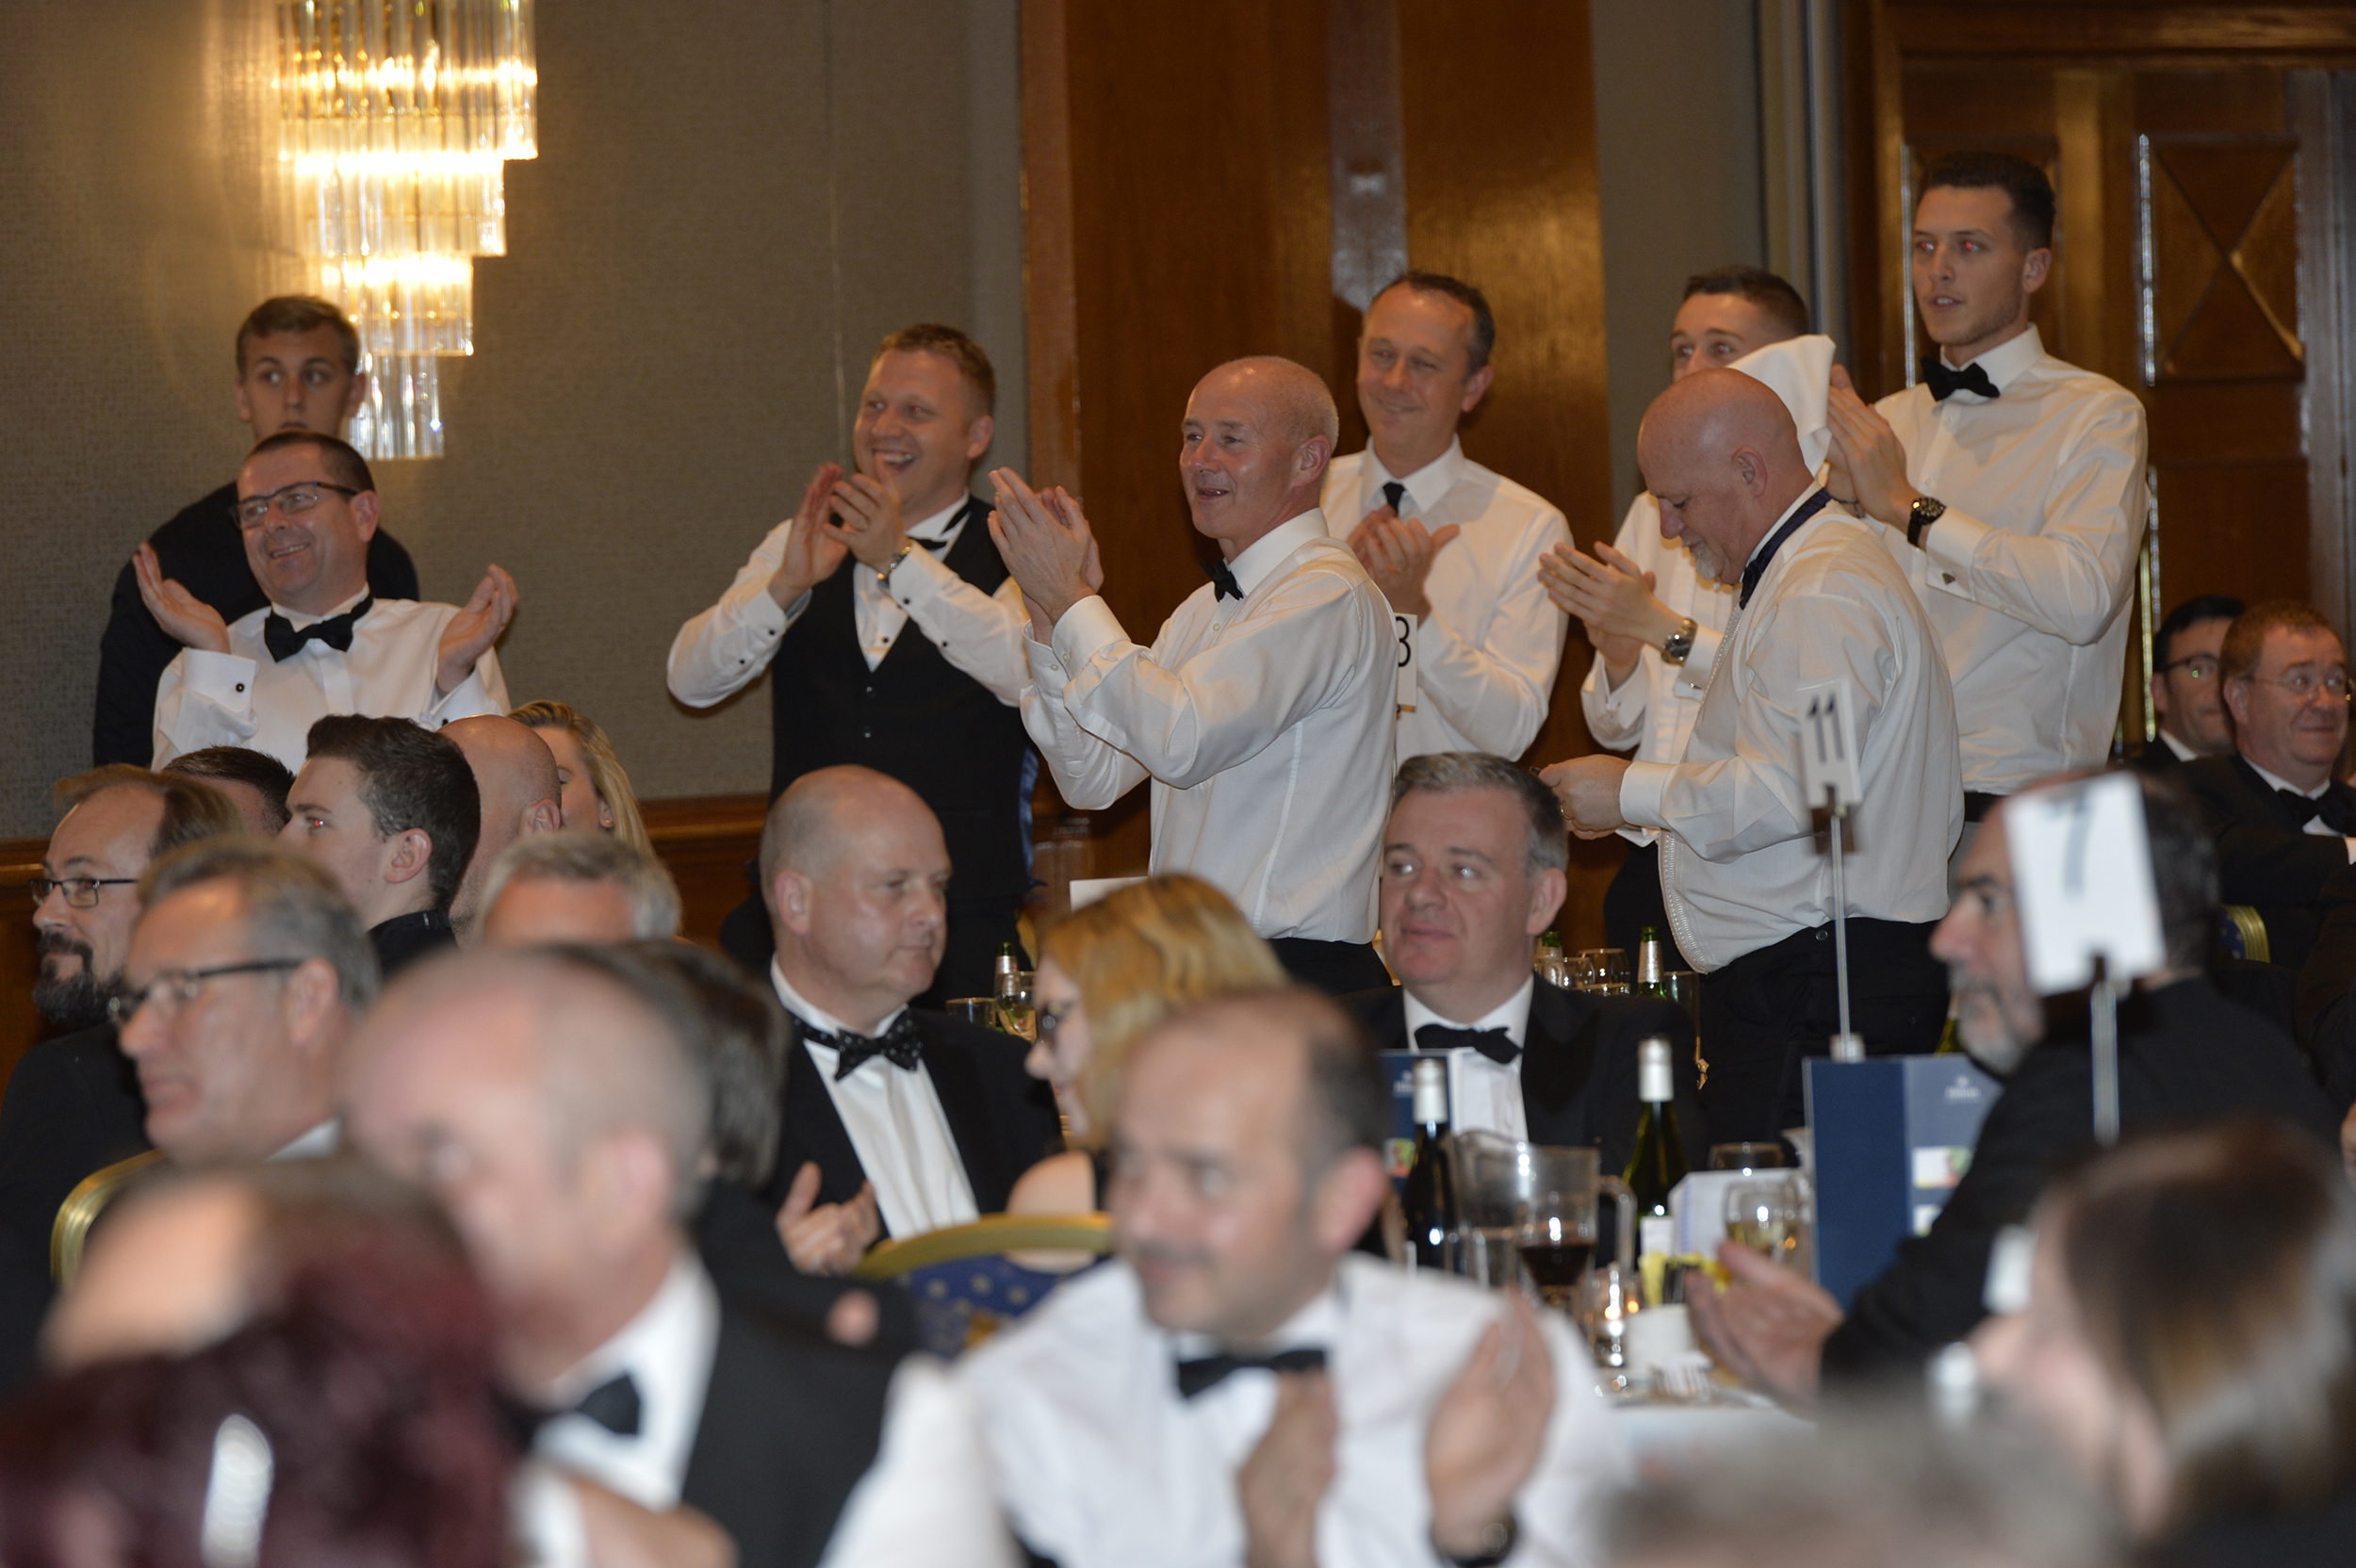 Celebrating a win at the Composites UK awards dinner in 2015.